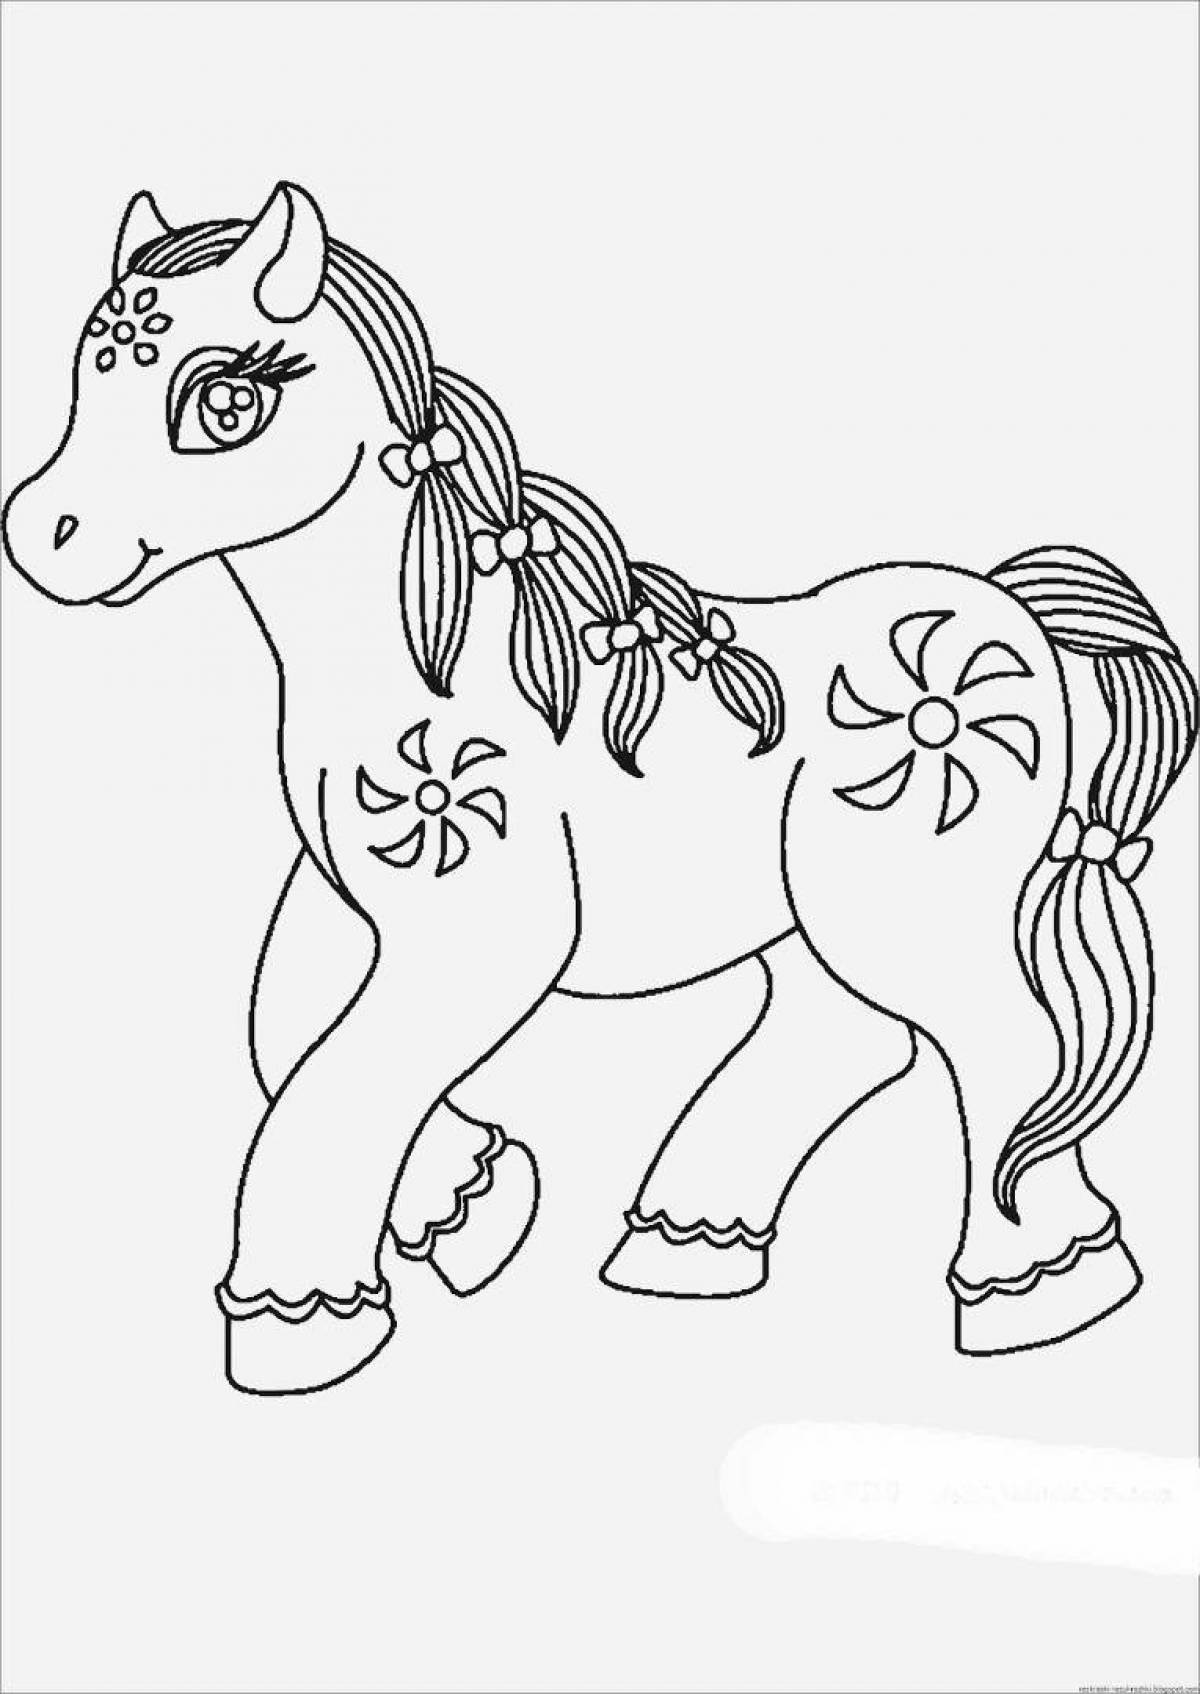 Adorable horse coloring book for kids 6-7 years old